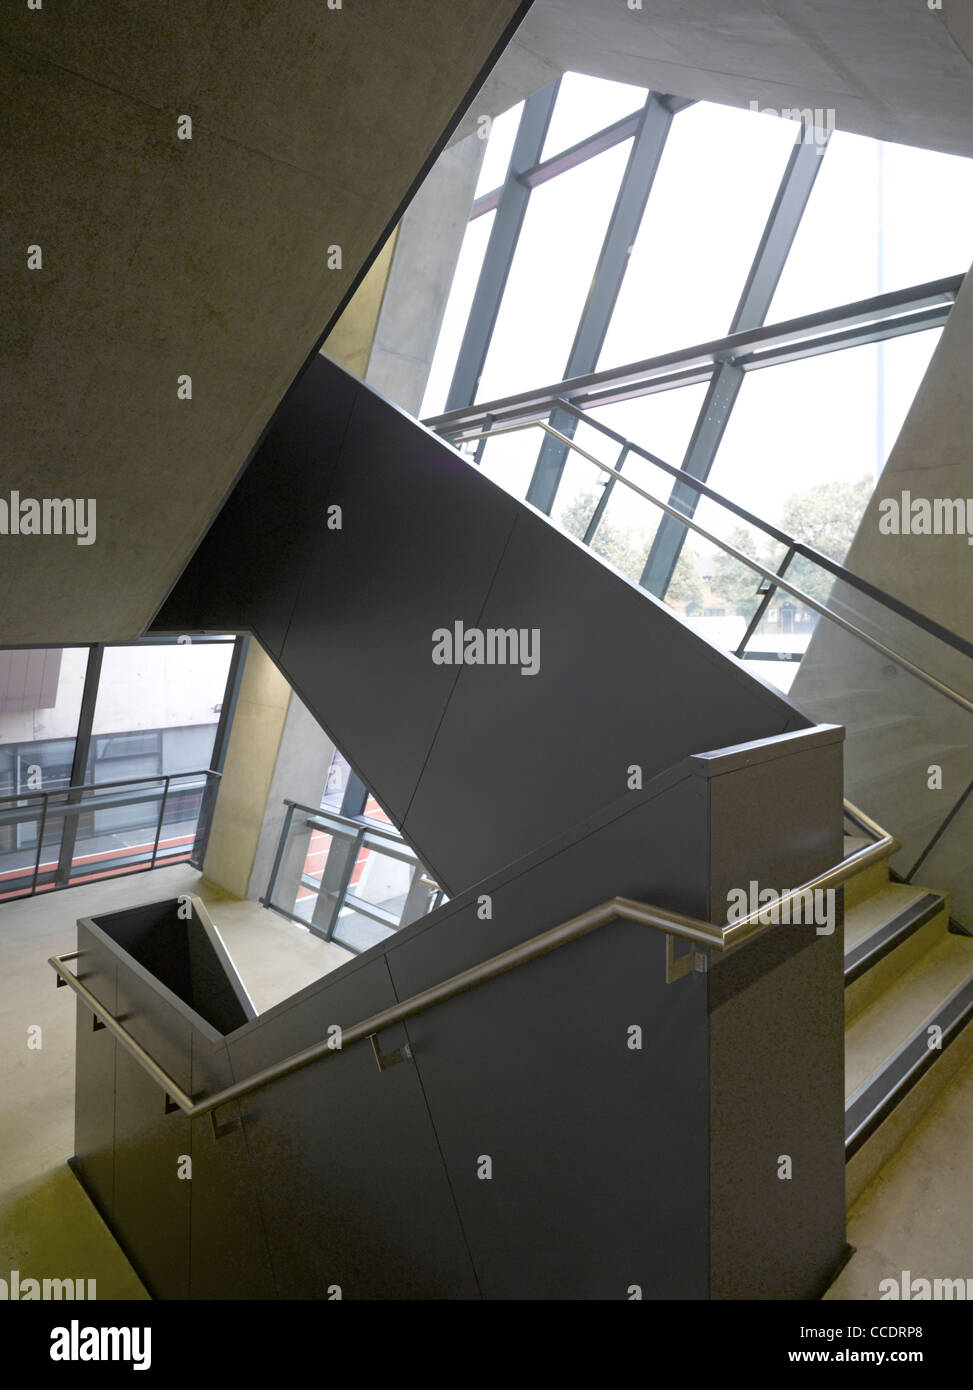 EVELYN GRACE ACADEMY, Brixton, ZAHA HADID ARCHITECTS STAIR- Banque D'Images